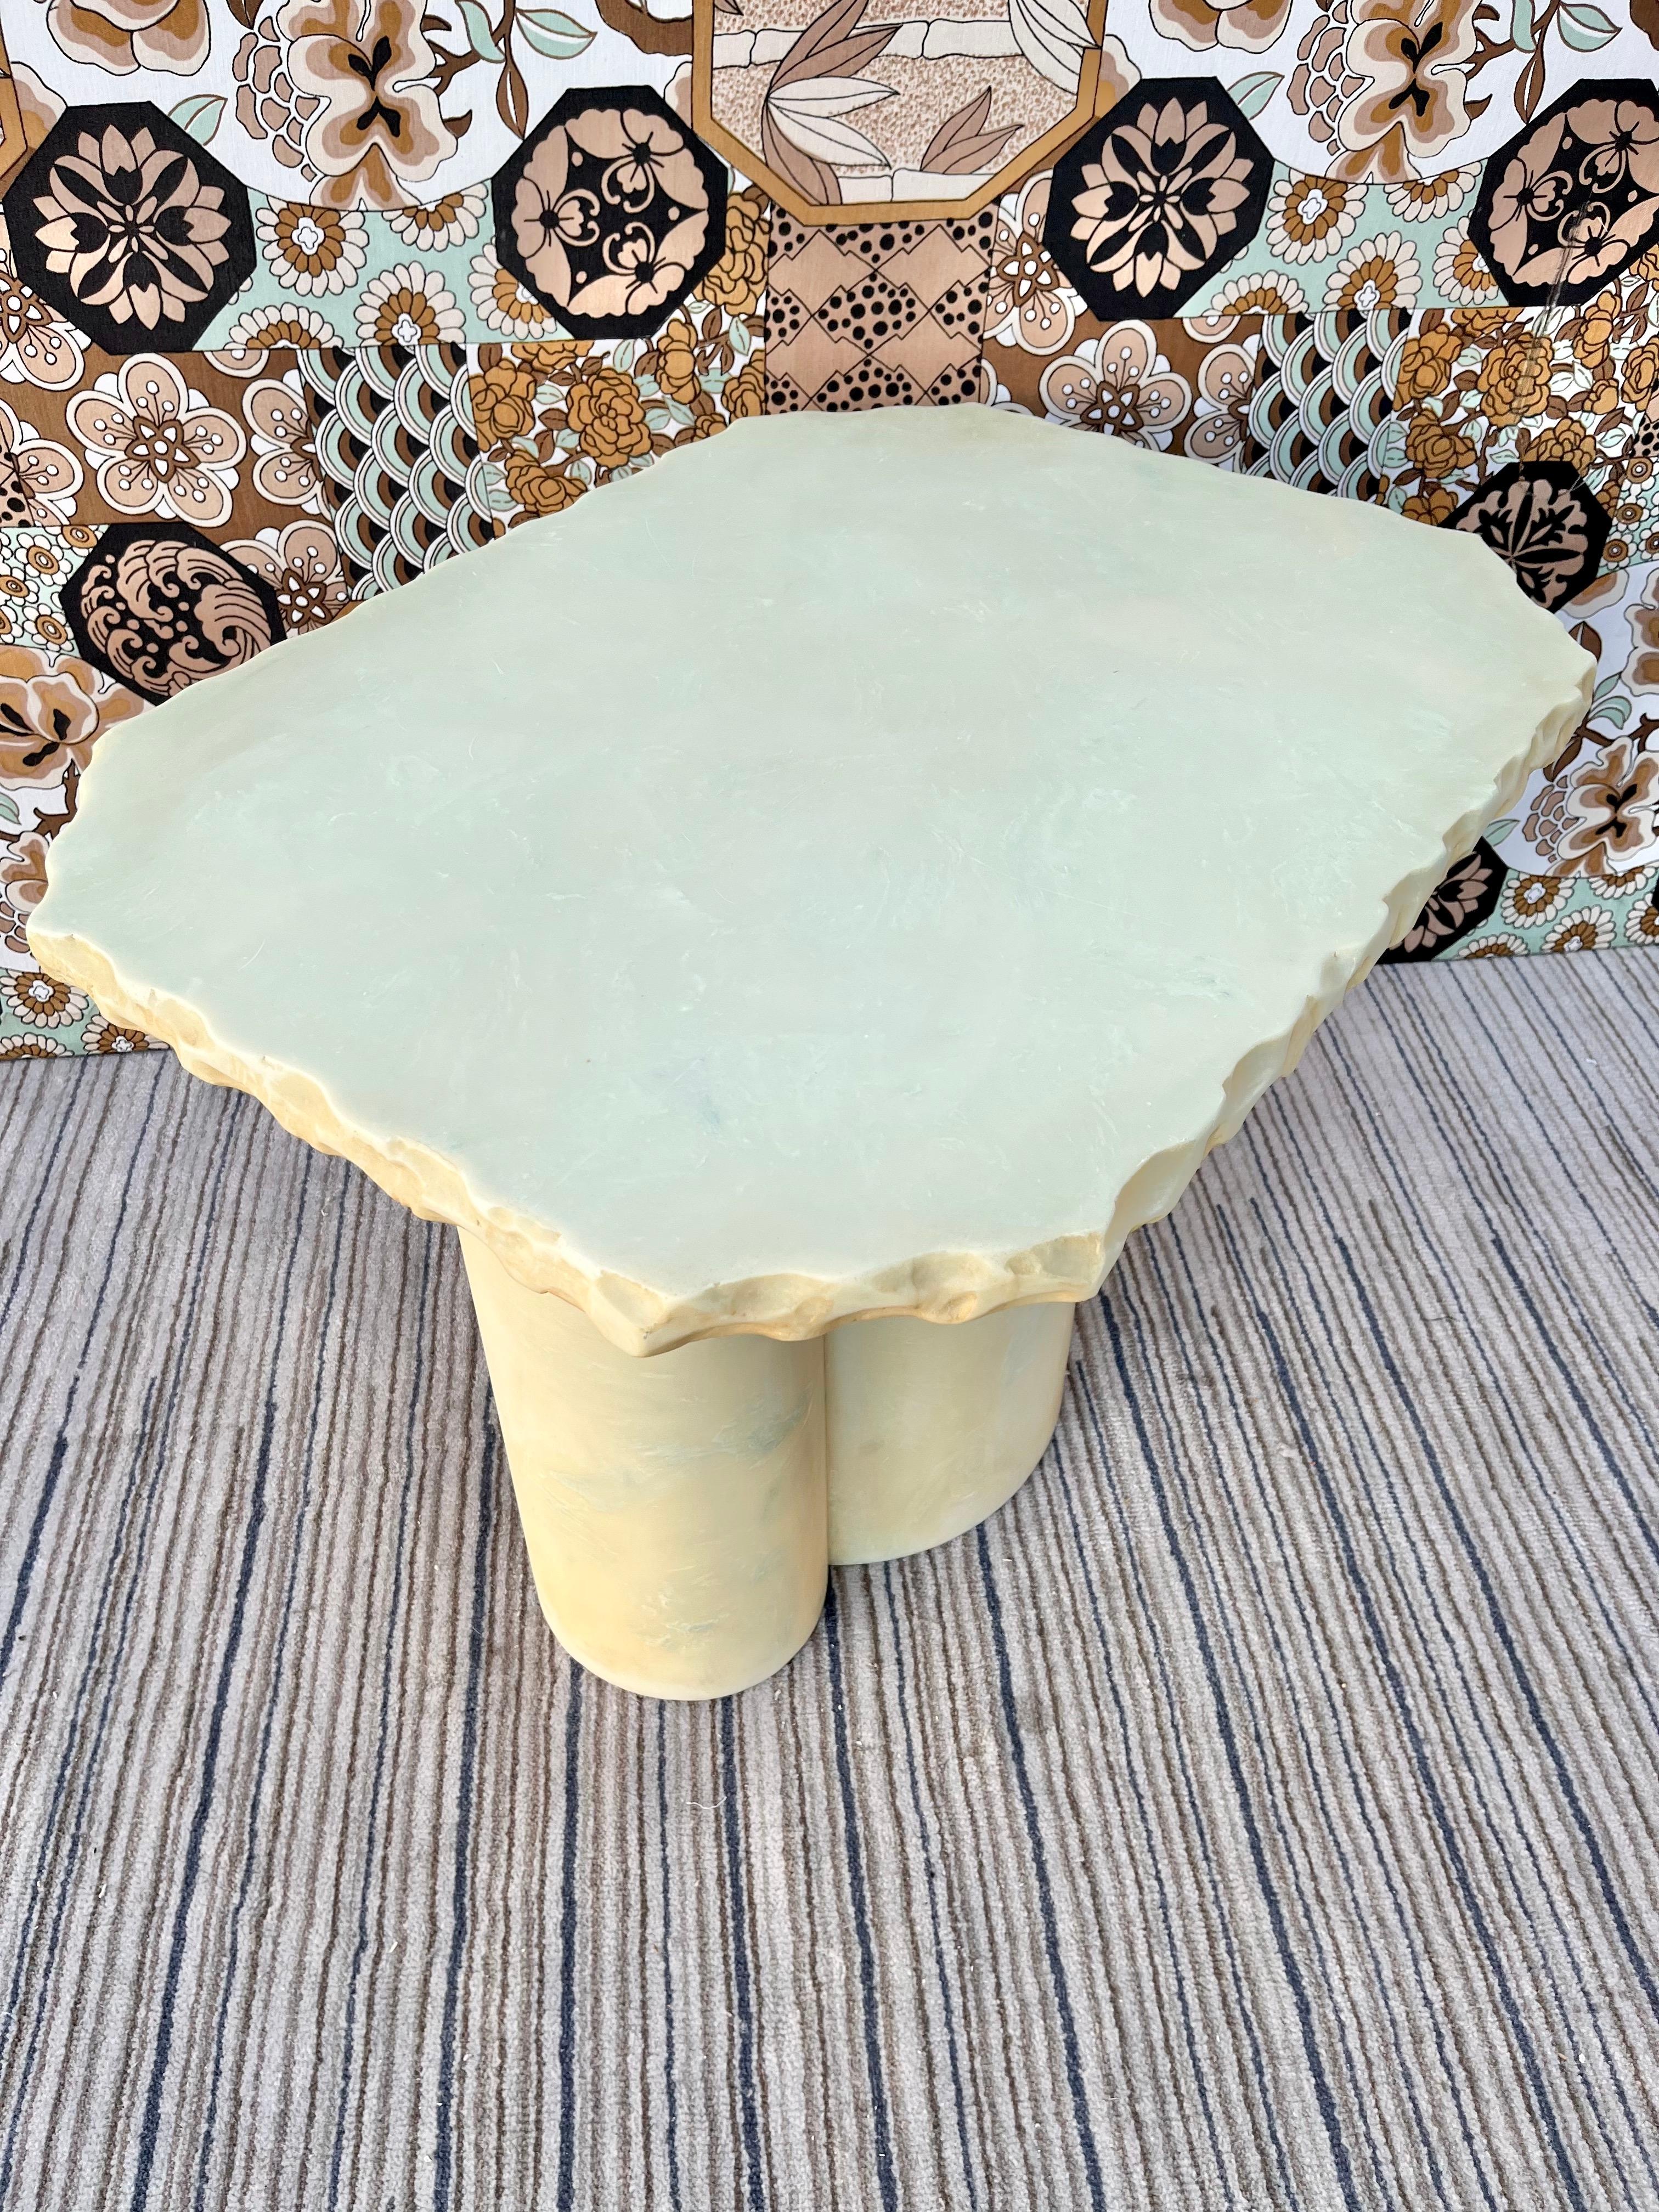 Late 20th century postmodern faux marble resin side table. Circa 1980s
Probably one of a kind, this handcrafted this side table features a green-yellowish tones marbleized appearance with raw or rough edges all around. The top is bolted to a smooth